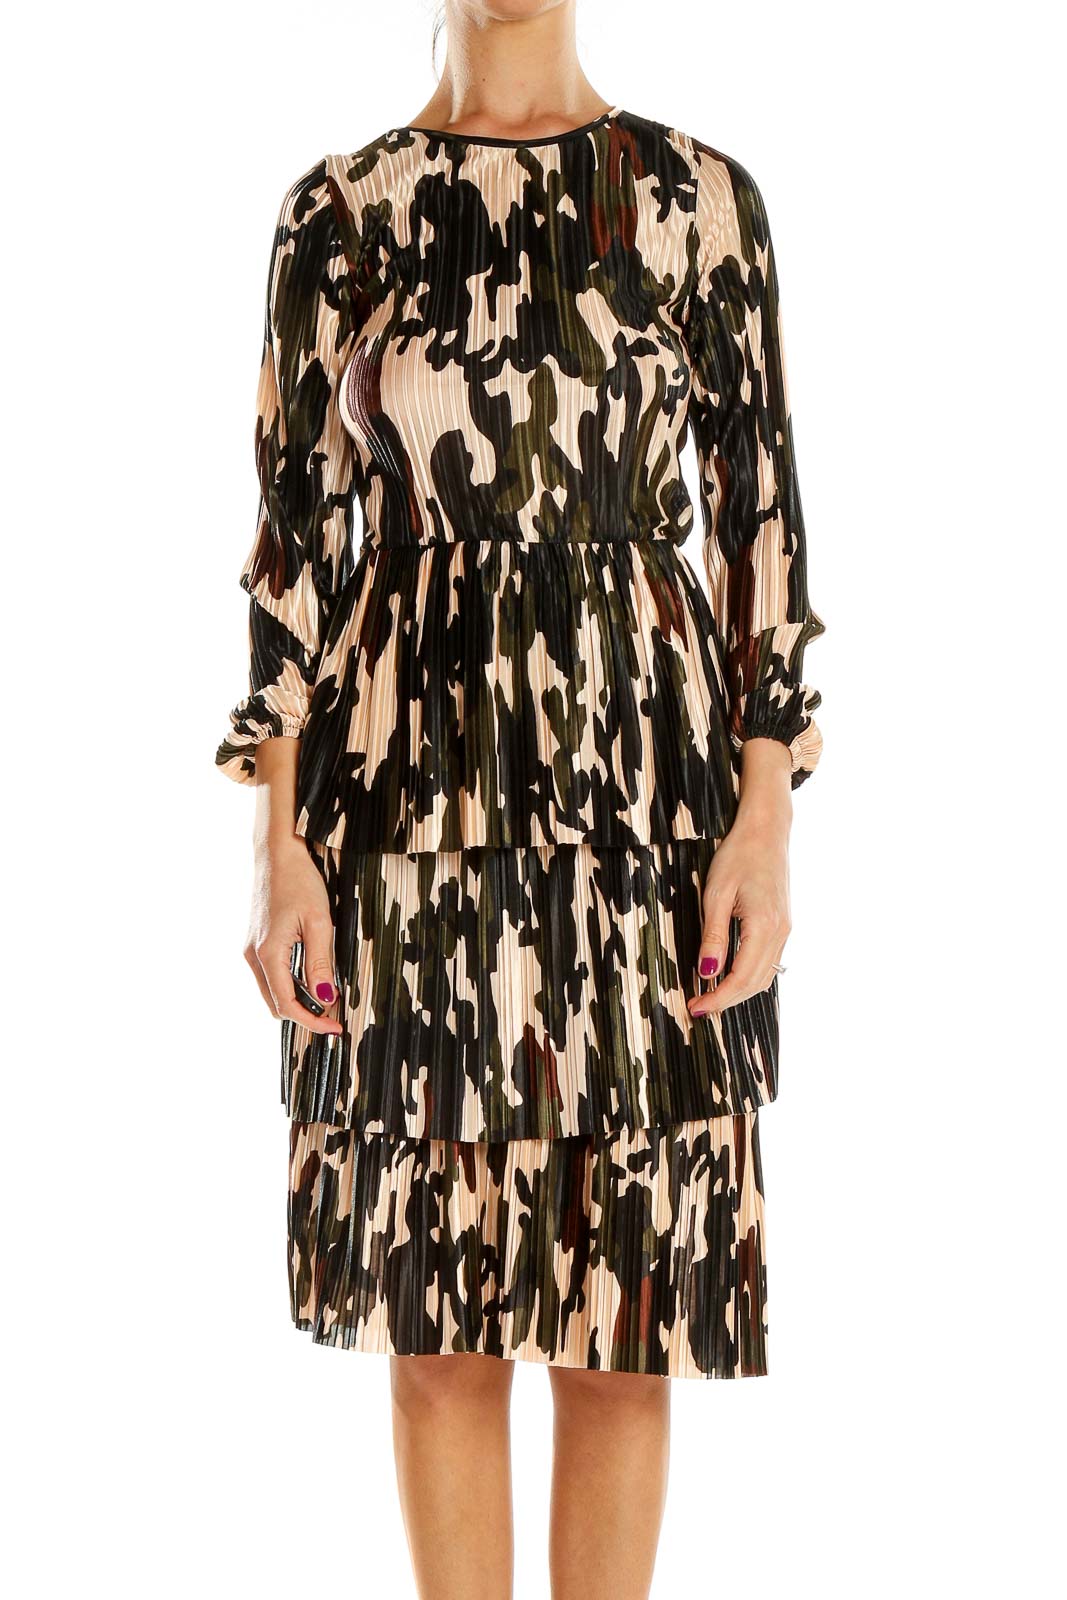 Brown Printed Textured Sheath Dress Front